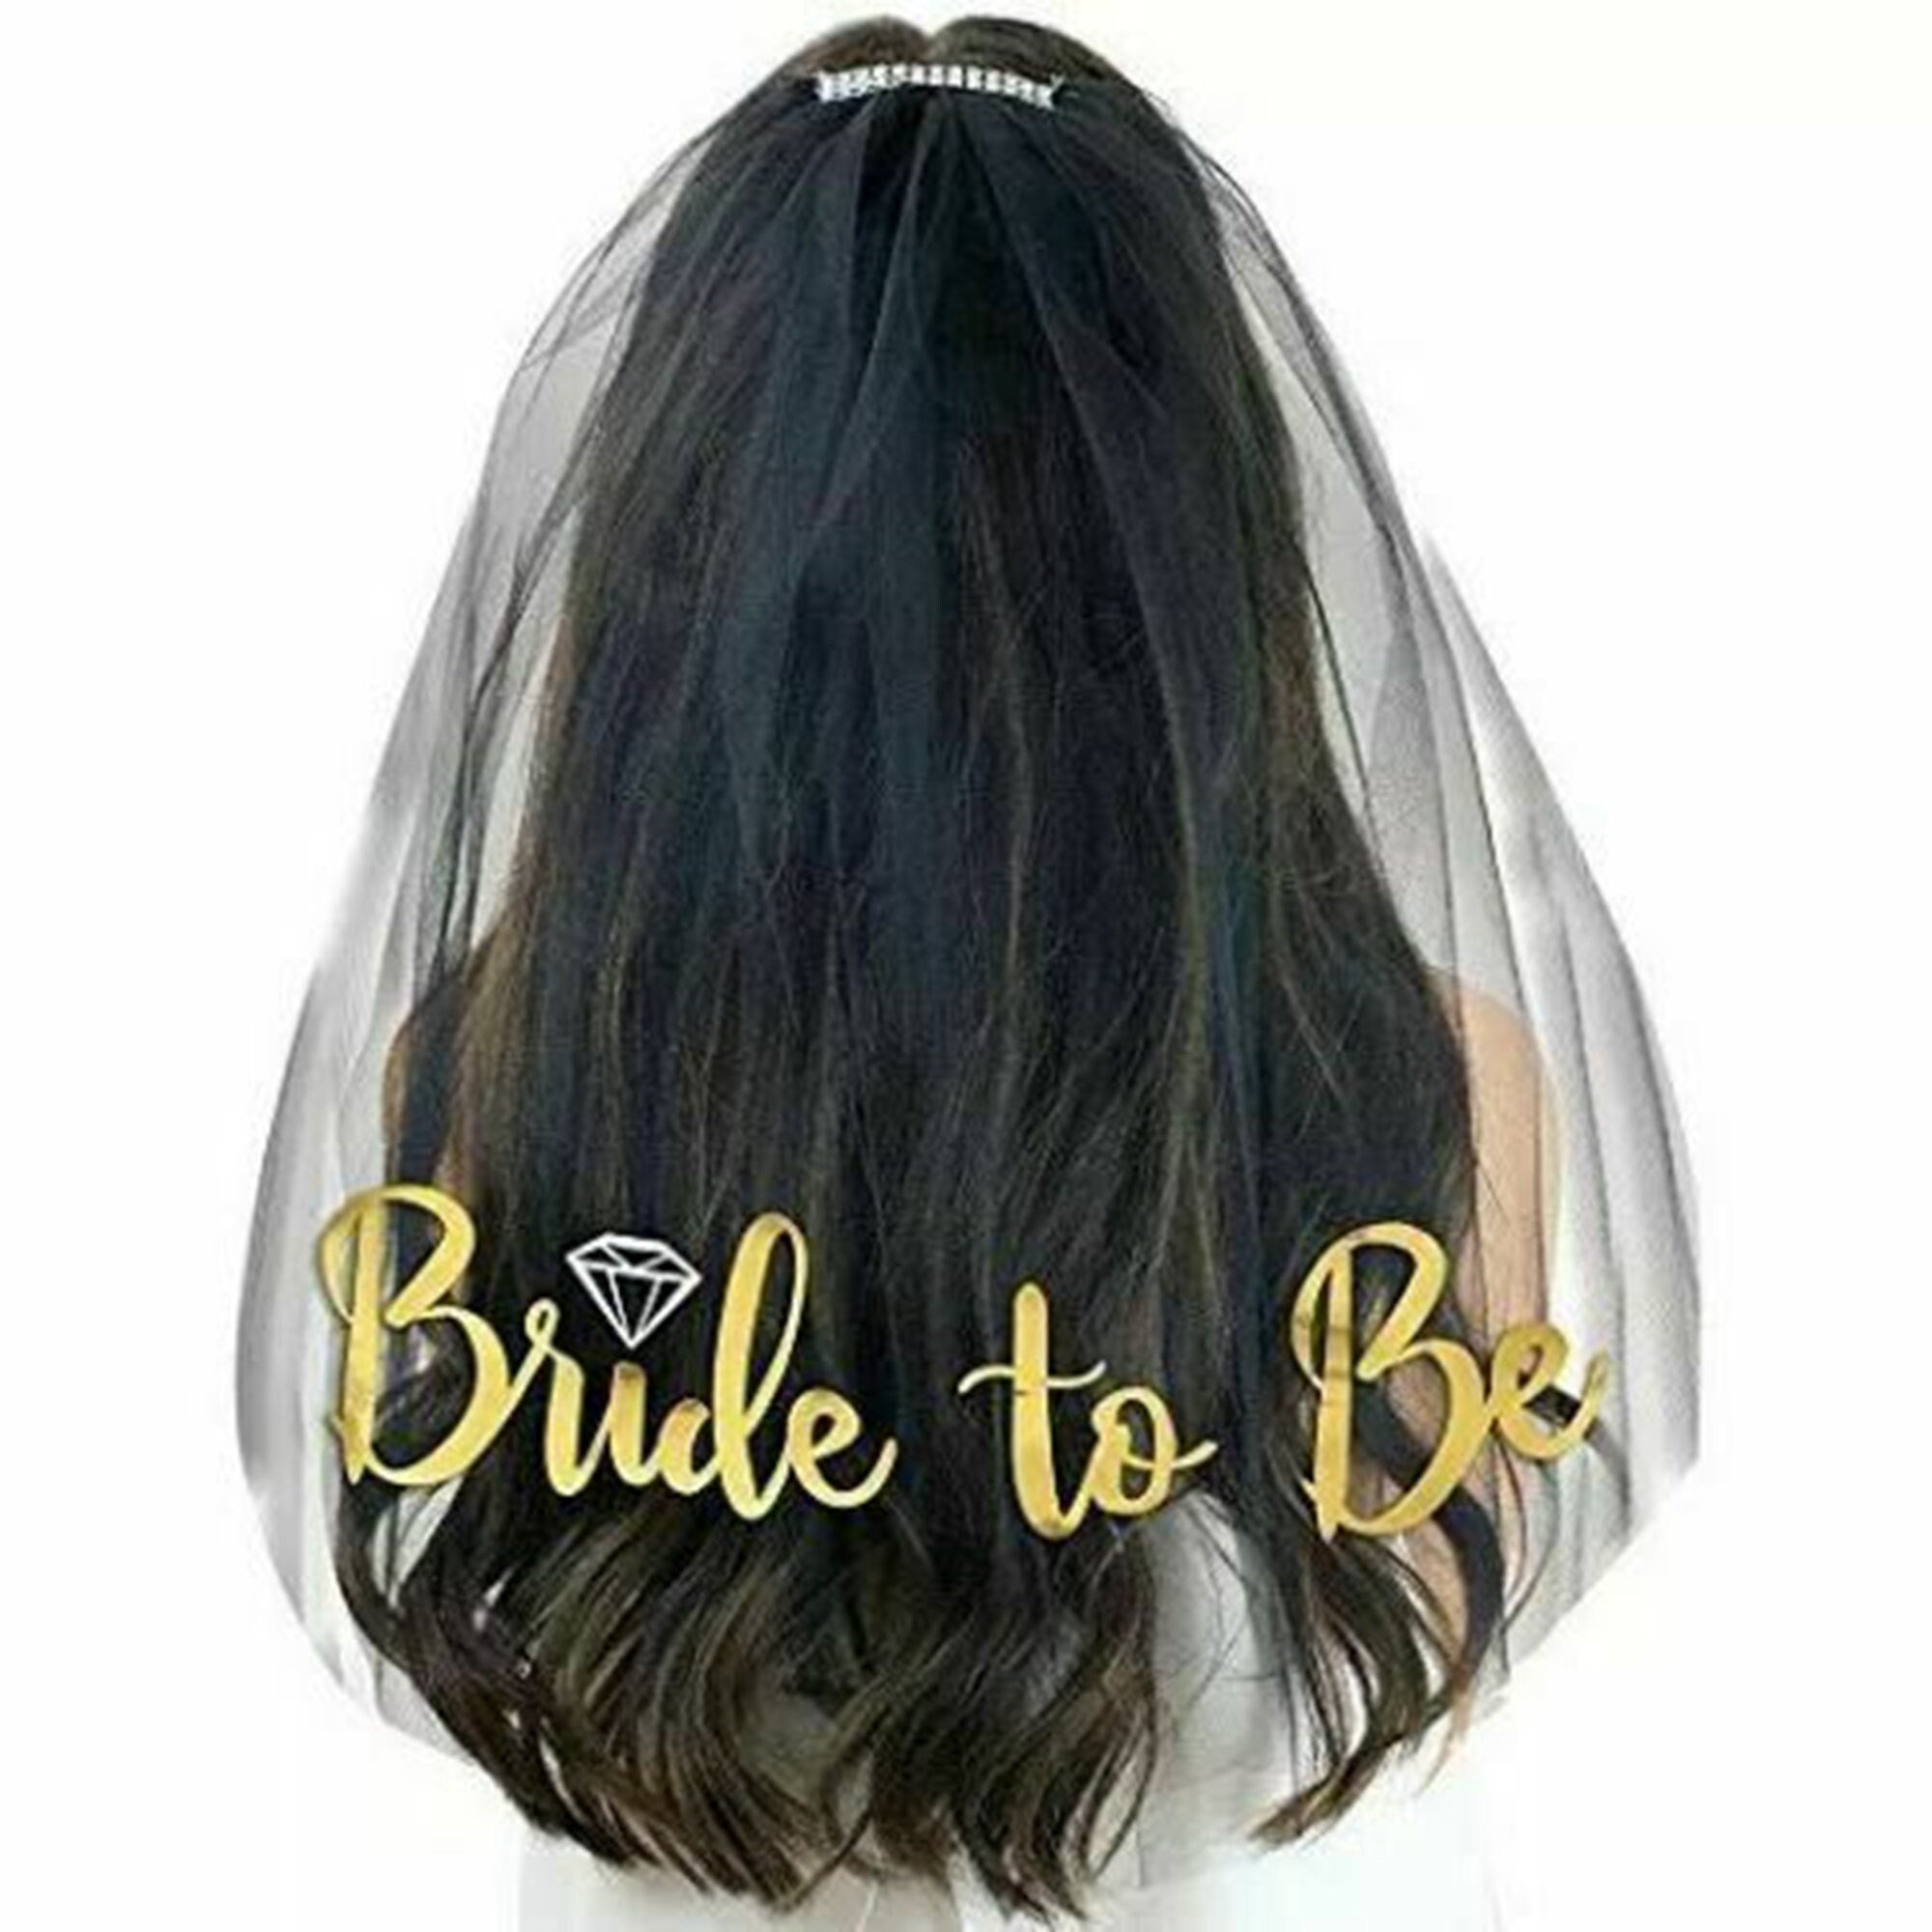 Bride To Be Hens Party Sash Tiara Hens Night Bridal Shower Accessories Bachelorette Veil Bachelorette Party Bridal Shower Tiara Hair Dec